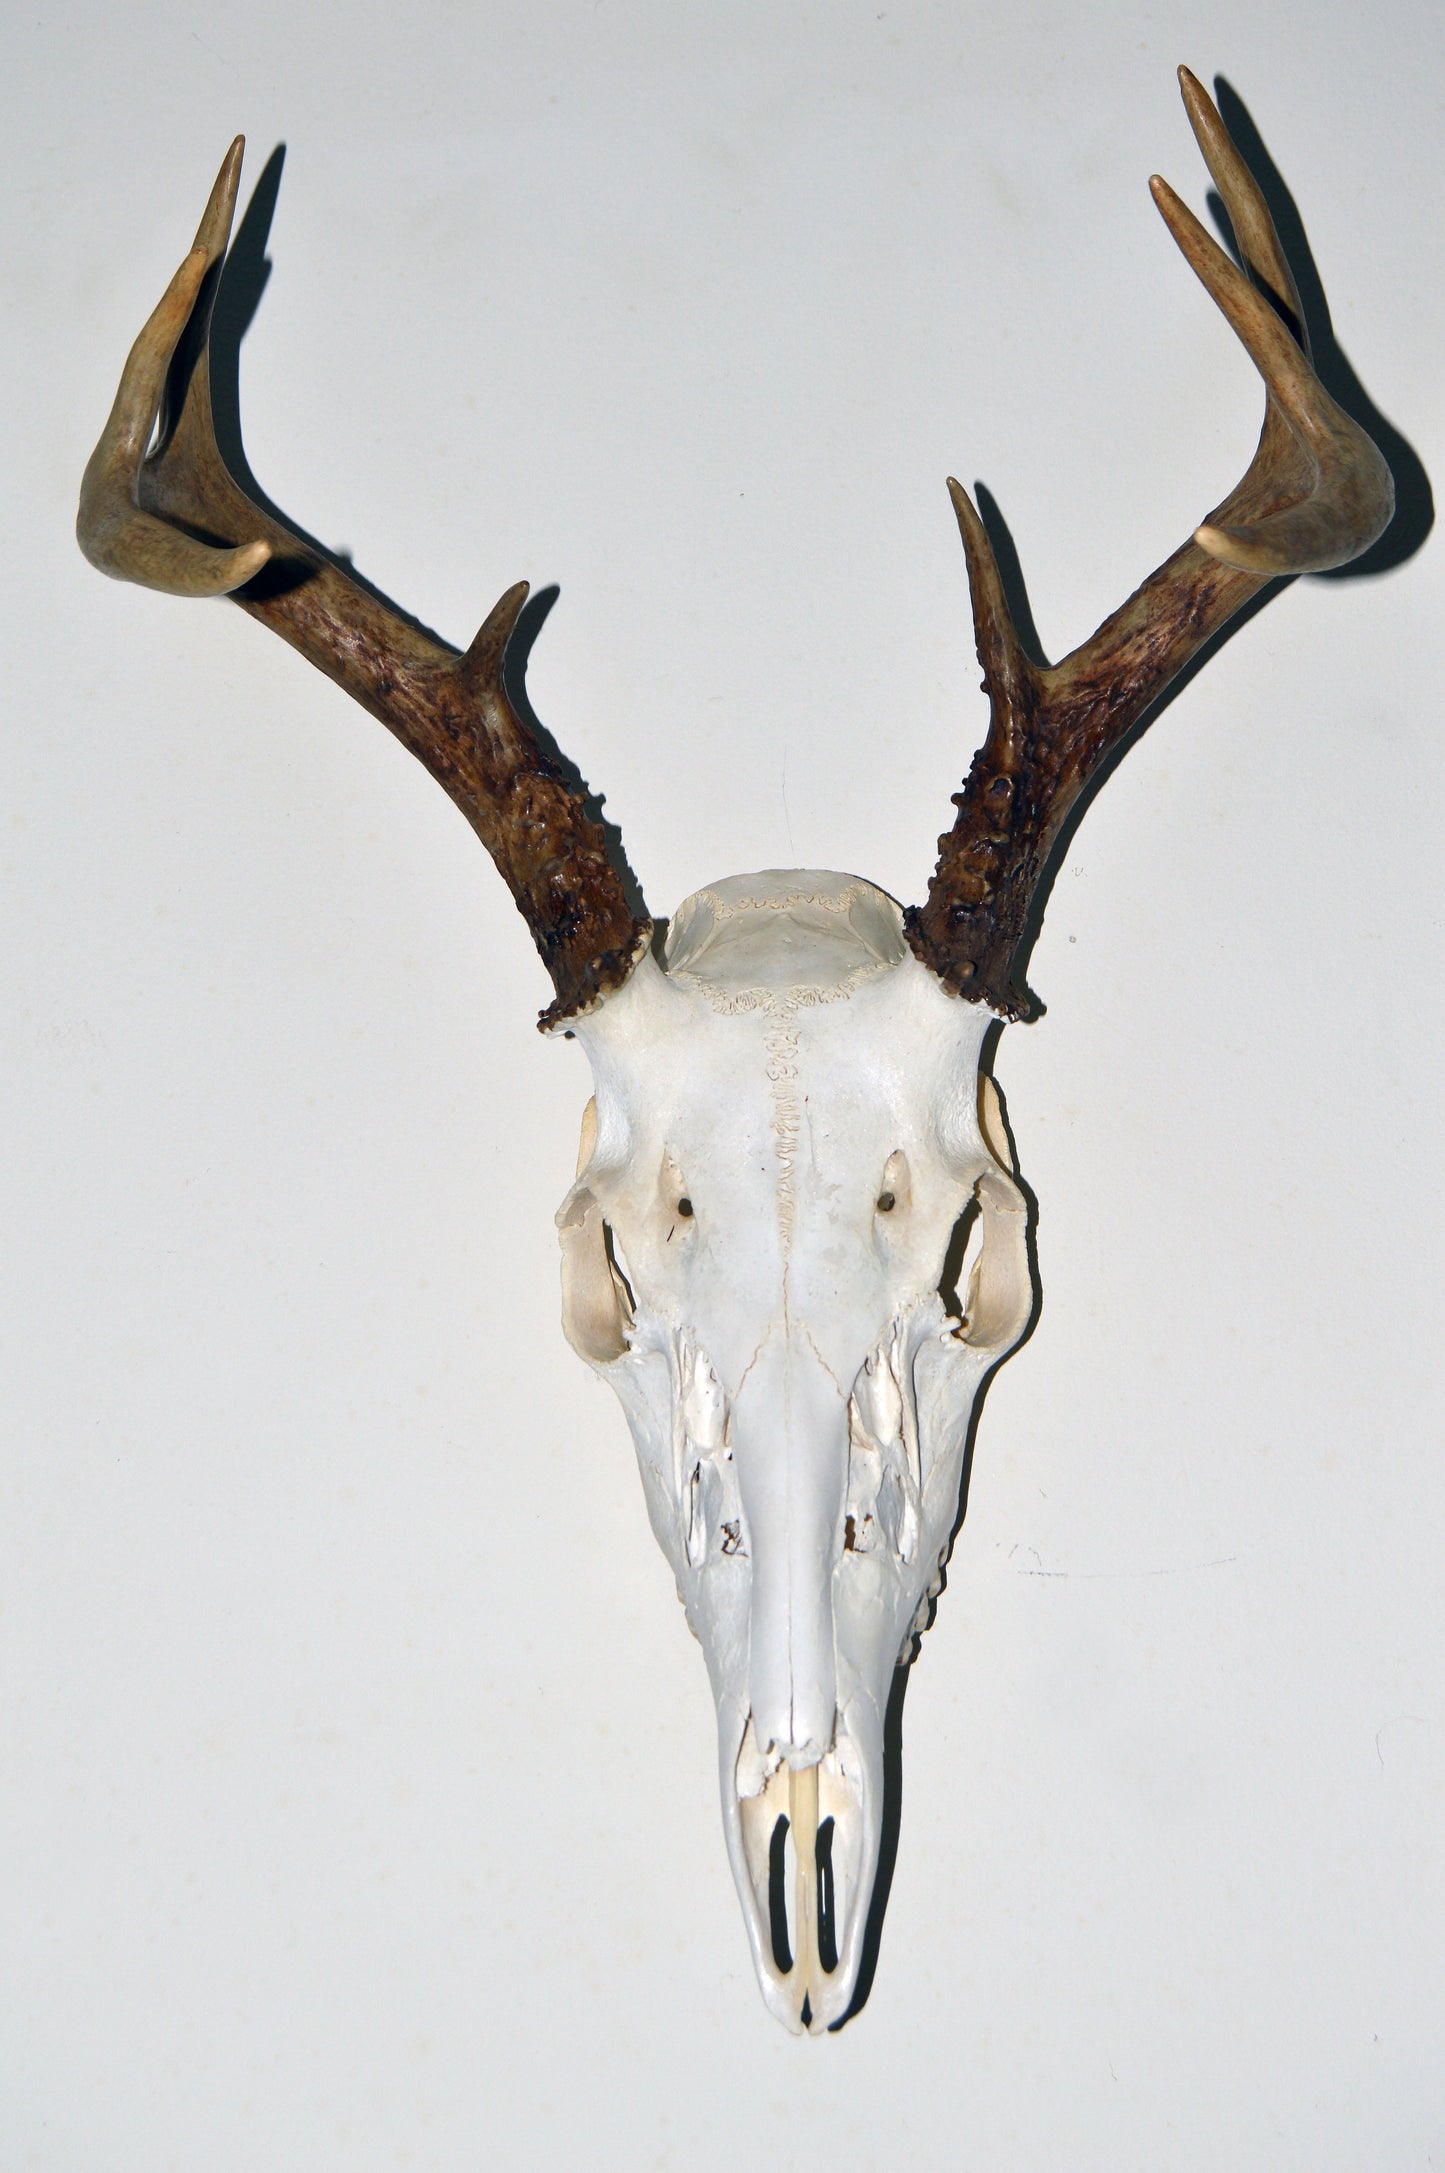 Whitetail Deer skull and antlers